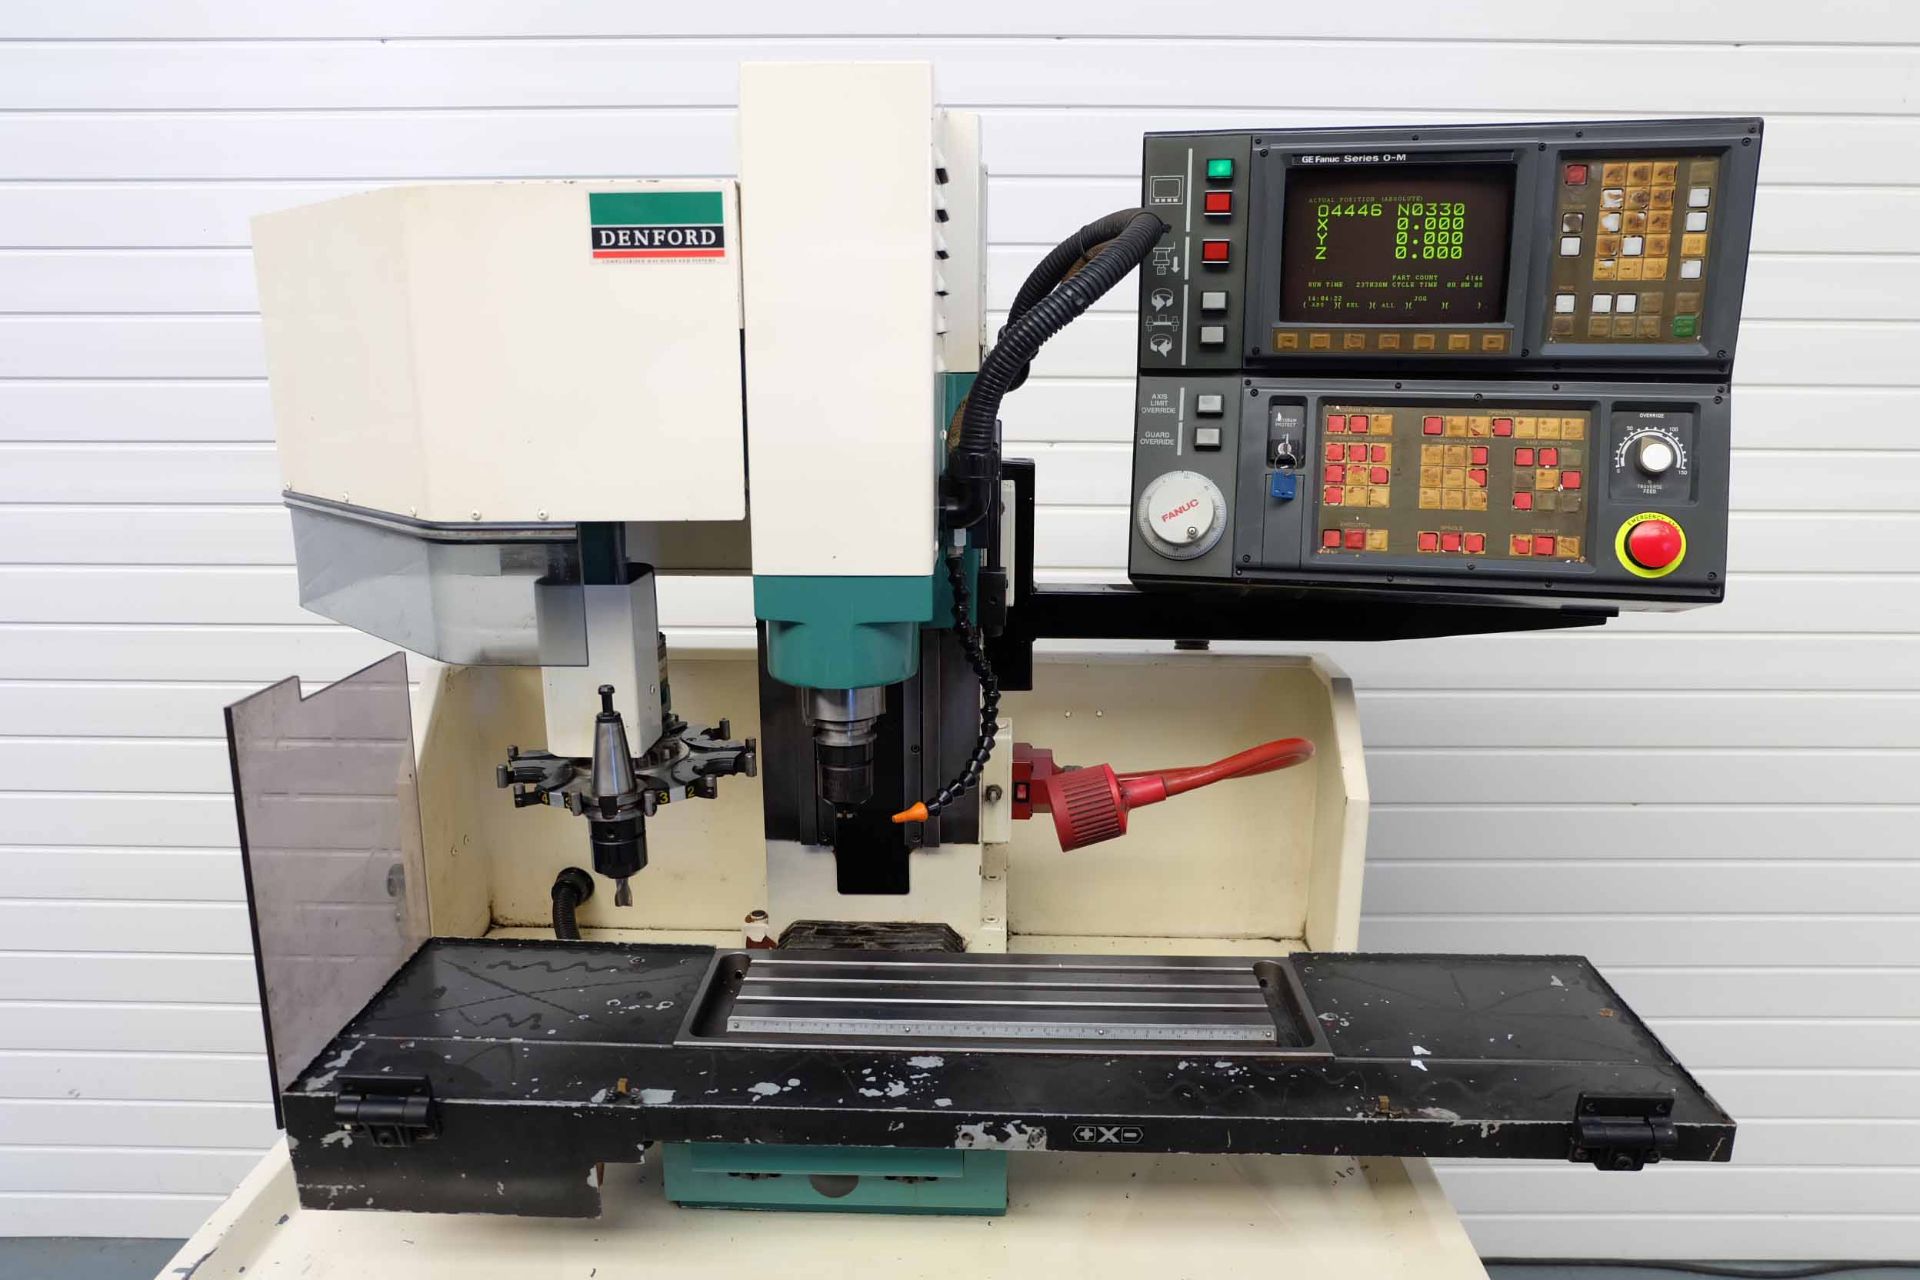 Denford Model Triac-Fanuc ATC CNC Milling Machine With 6 Station Auto Tool Changer. Fanuc Series O-M - Image 2 of 9